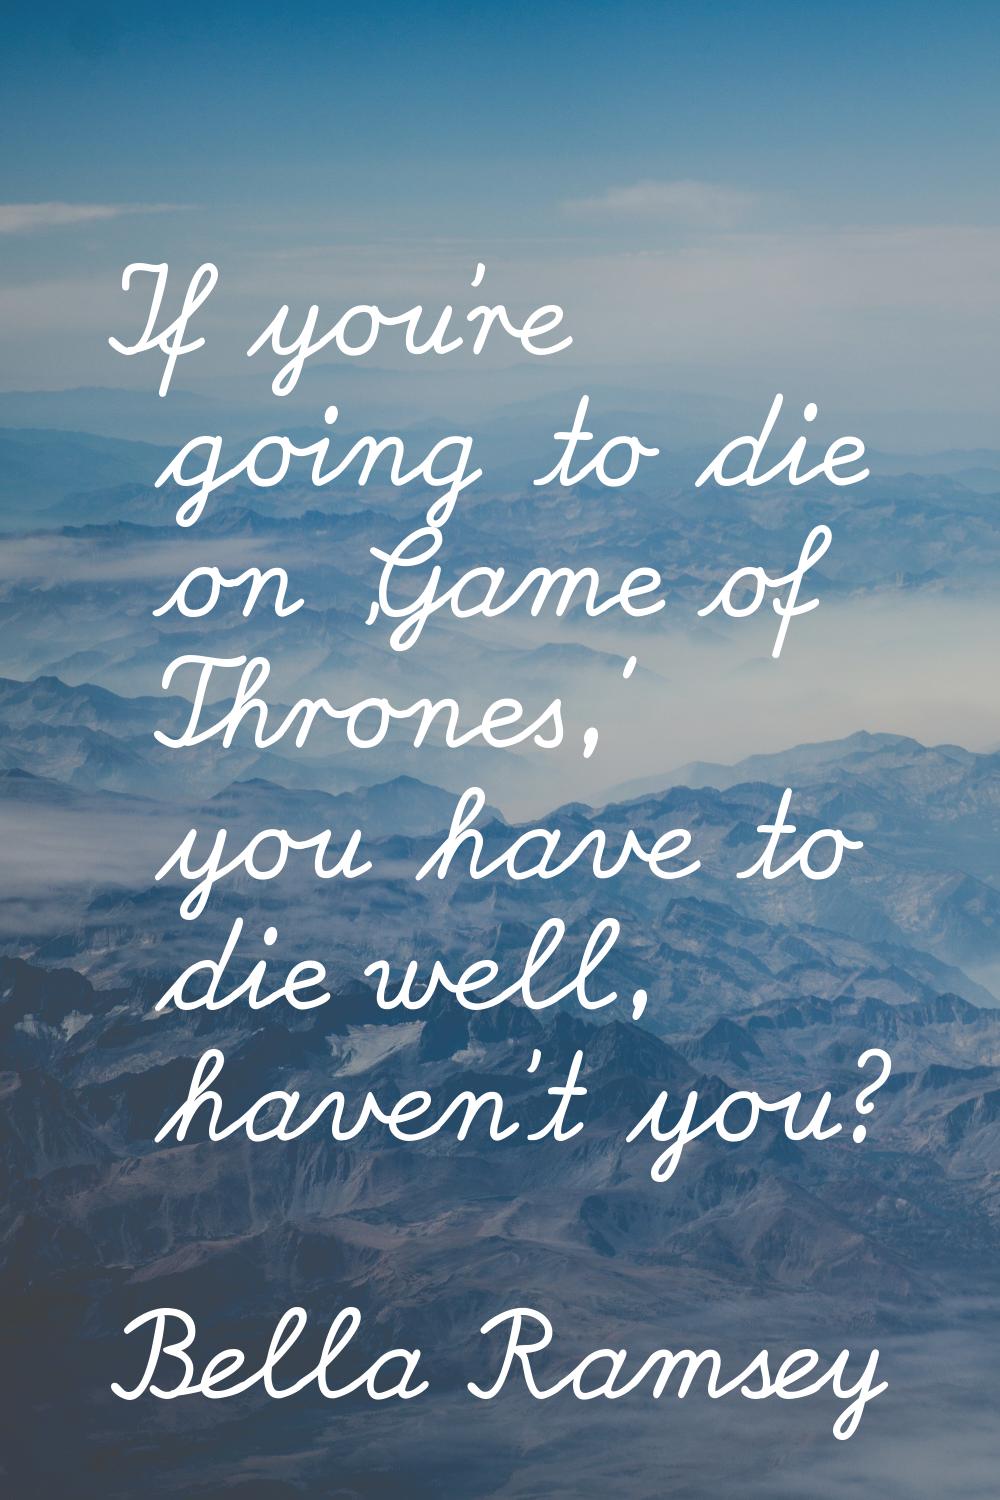 If you're going to die on 'Game of Thrones,' you have to die well, haven't you?